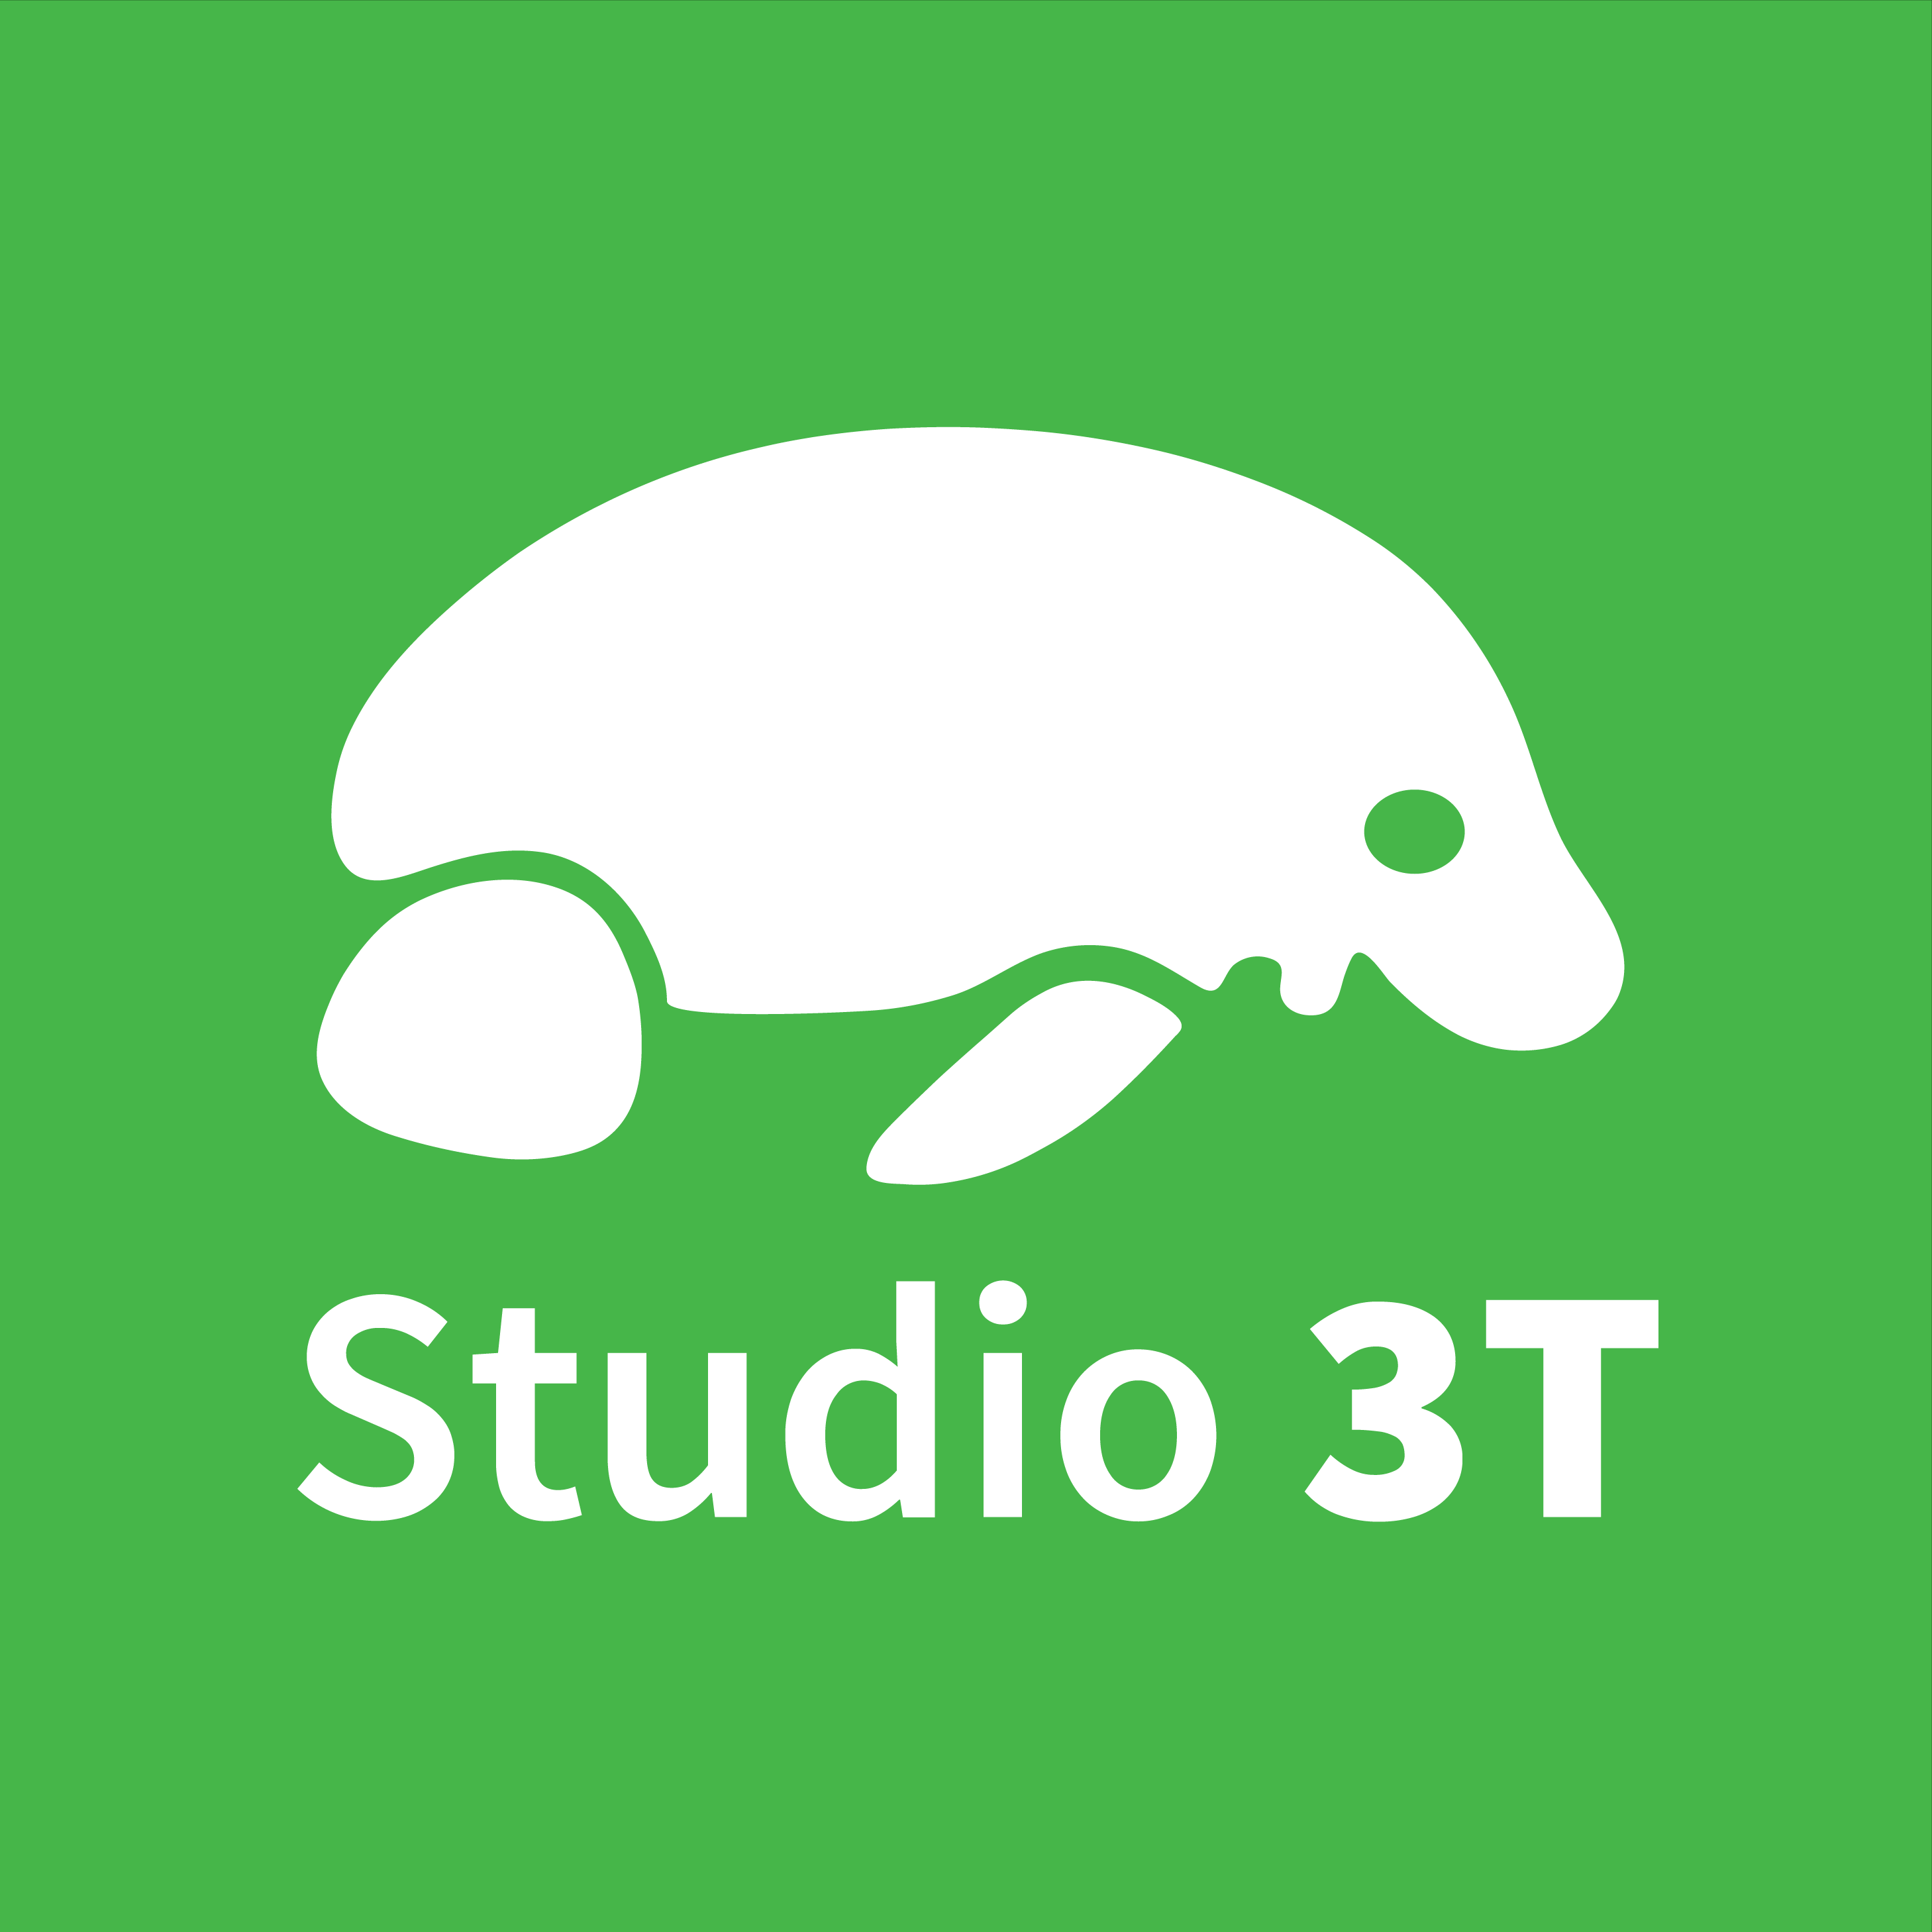 Powered by Studio 3T